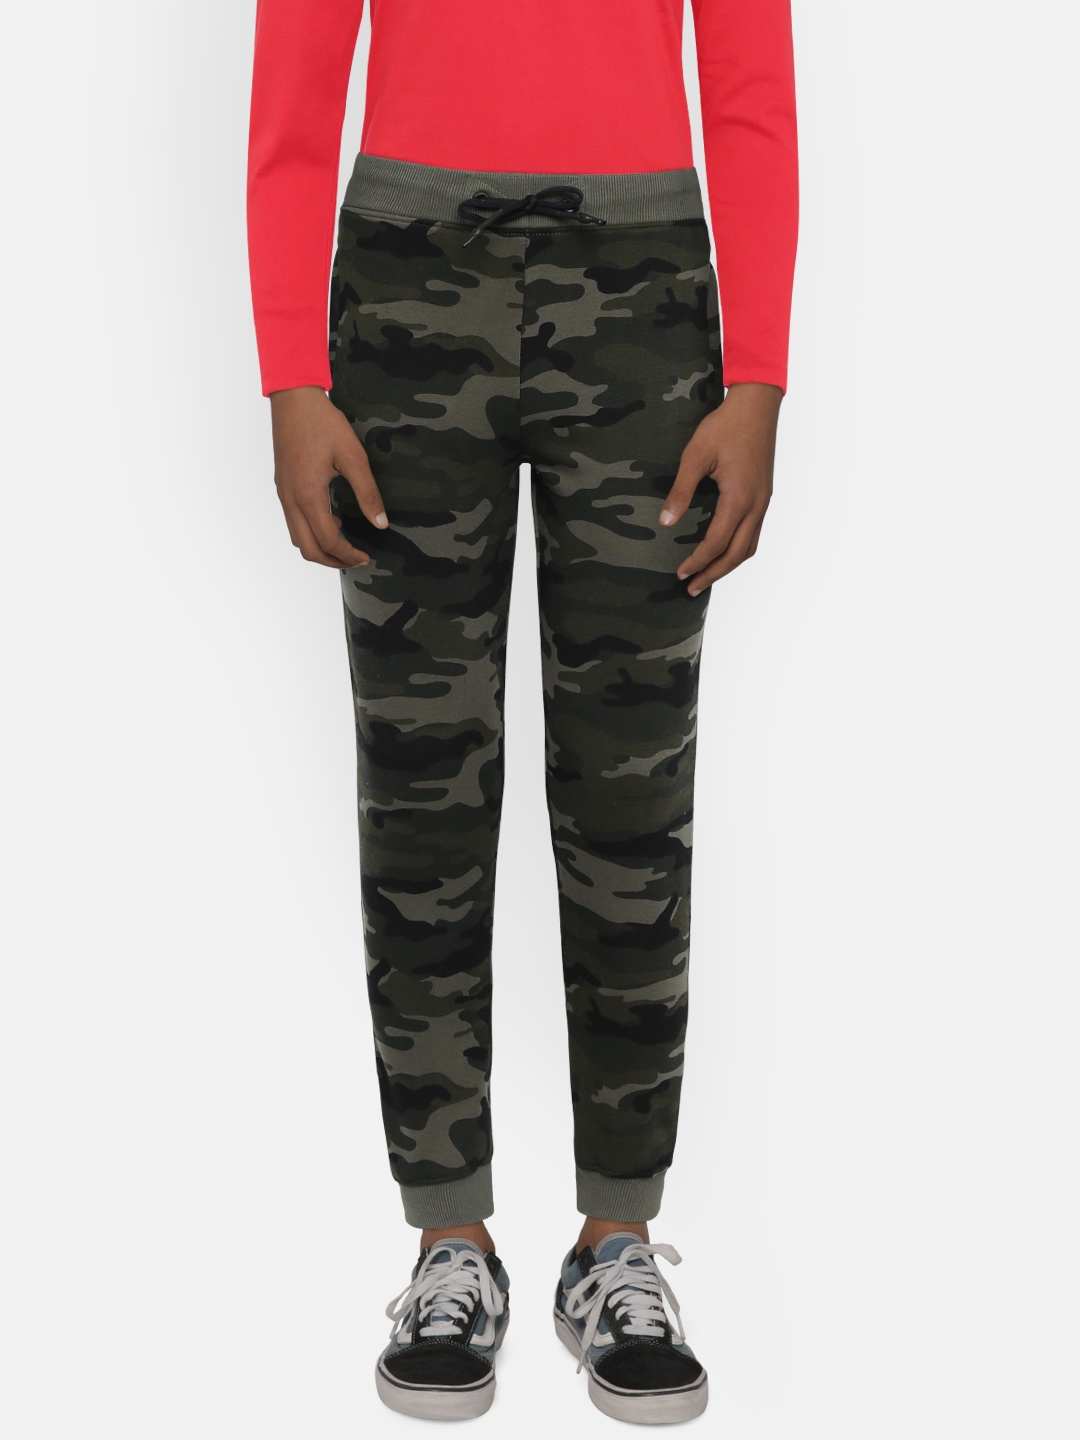 Octave Boys Olive Green Camouflage Print Joggers